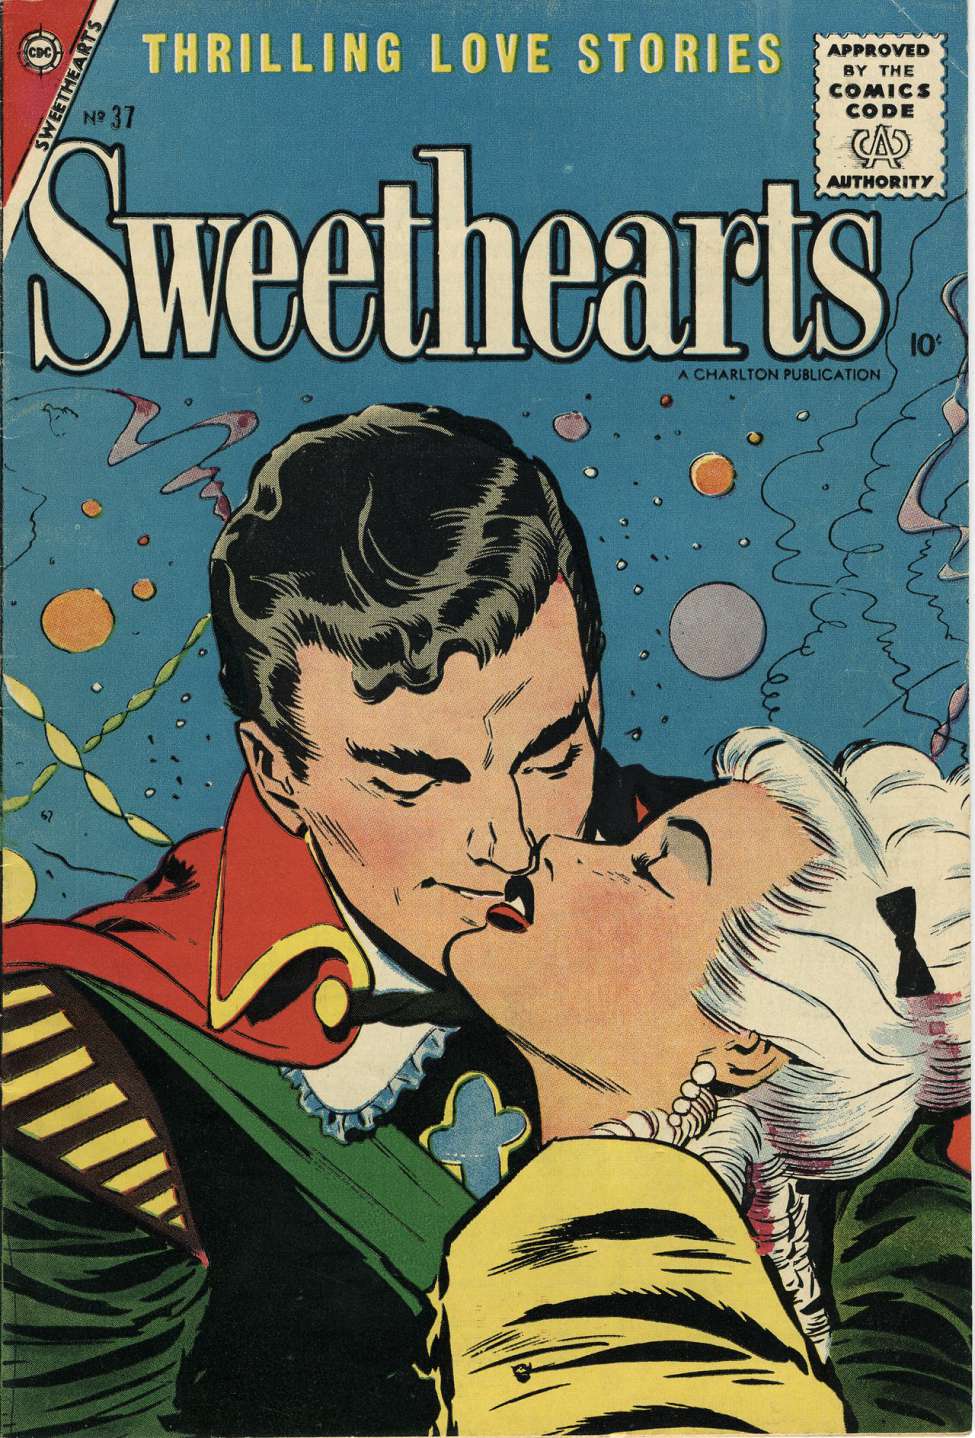 Book Cover For Sweethearts 37 - Version 2